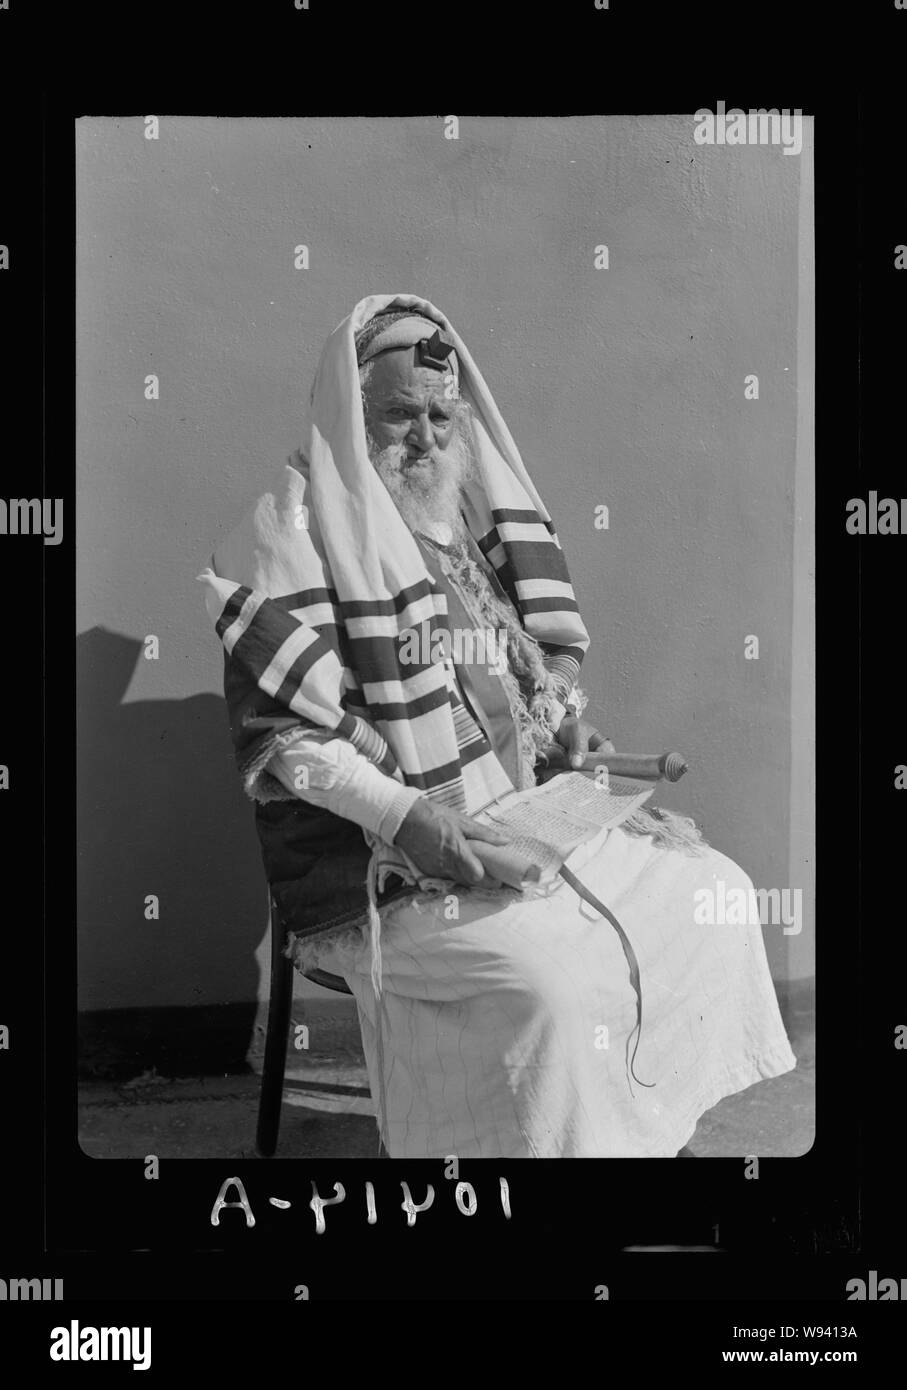 Abram Yemenite Jew with book in hand, reading scroll (Magella) with phylacteries on forehead Stock Photo